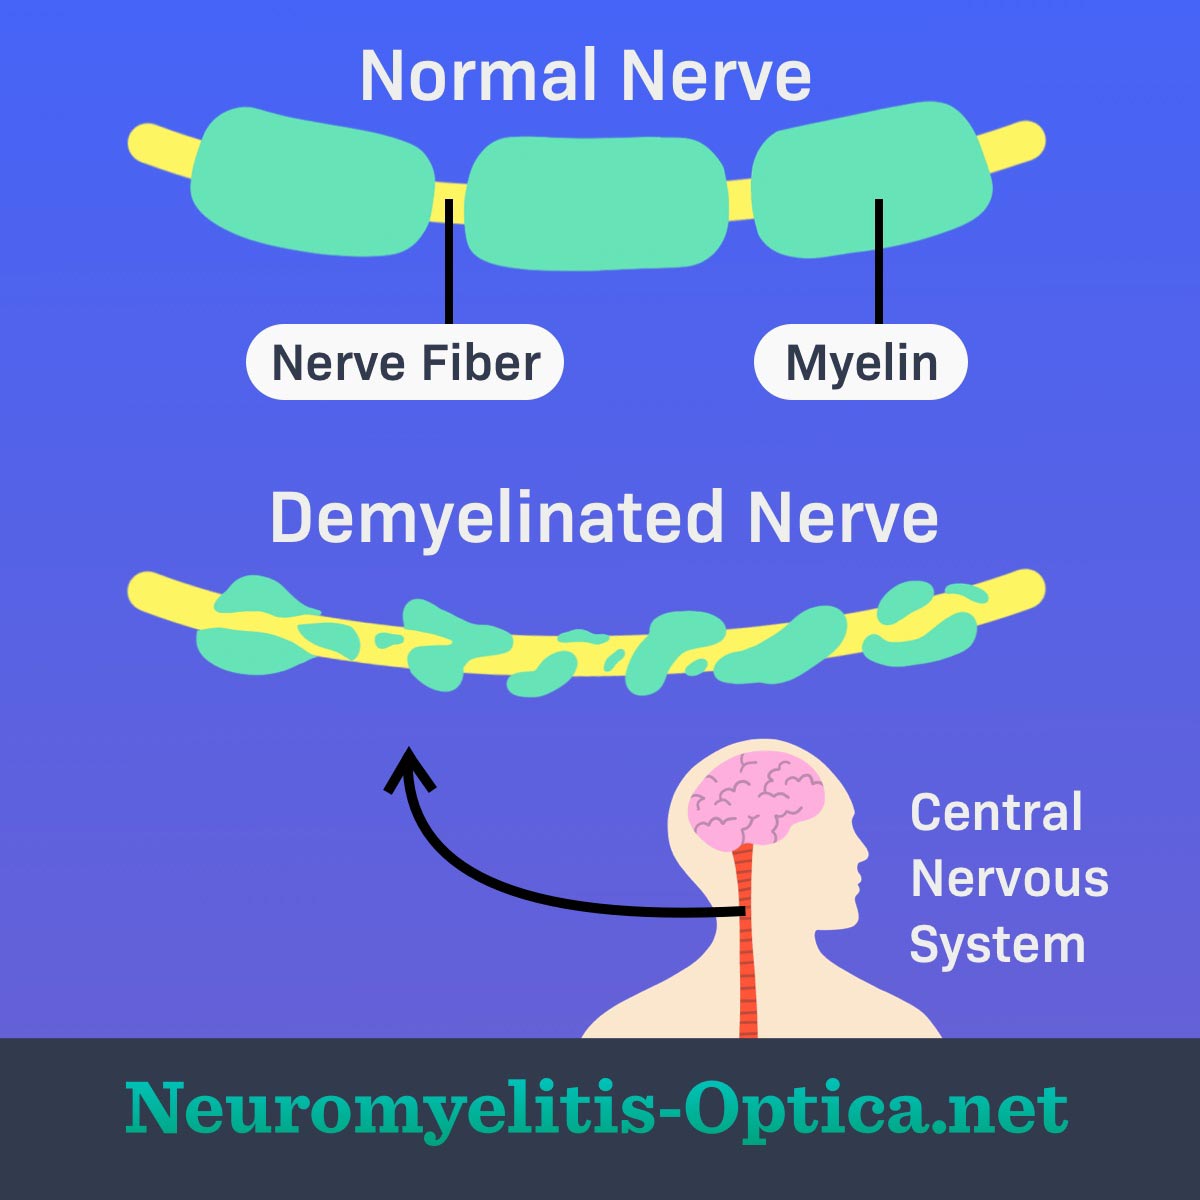 Two nerve images are shown, one depicting a nerve with normal myelin and another depicting a nerve with demyelination.